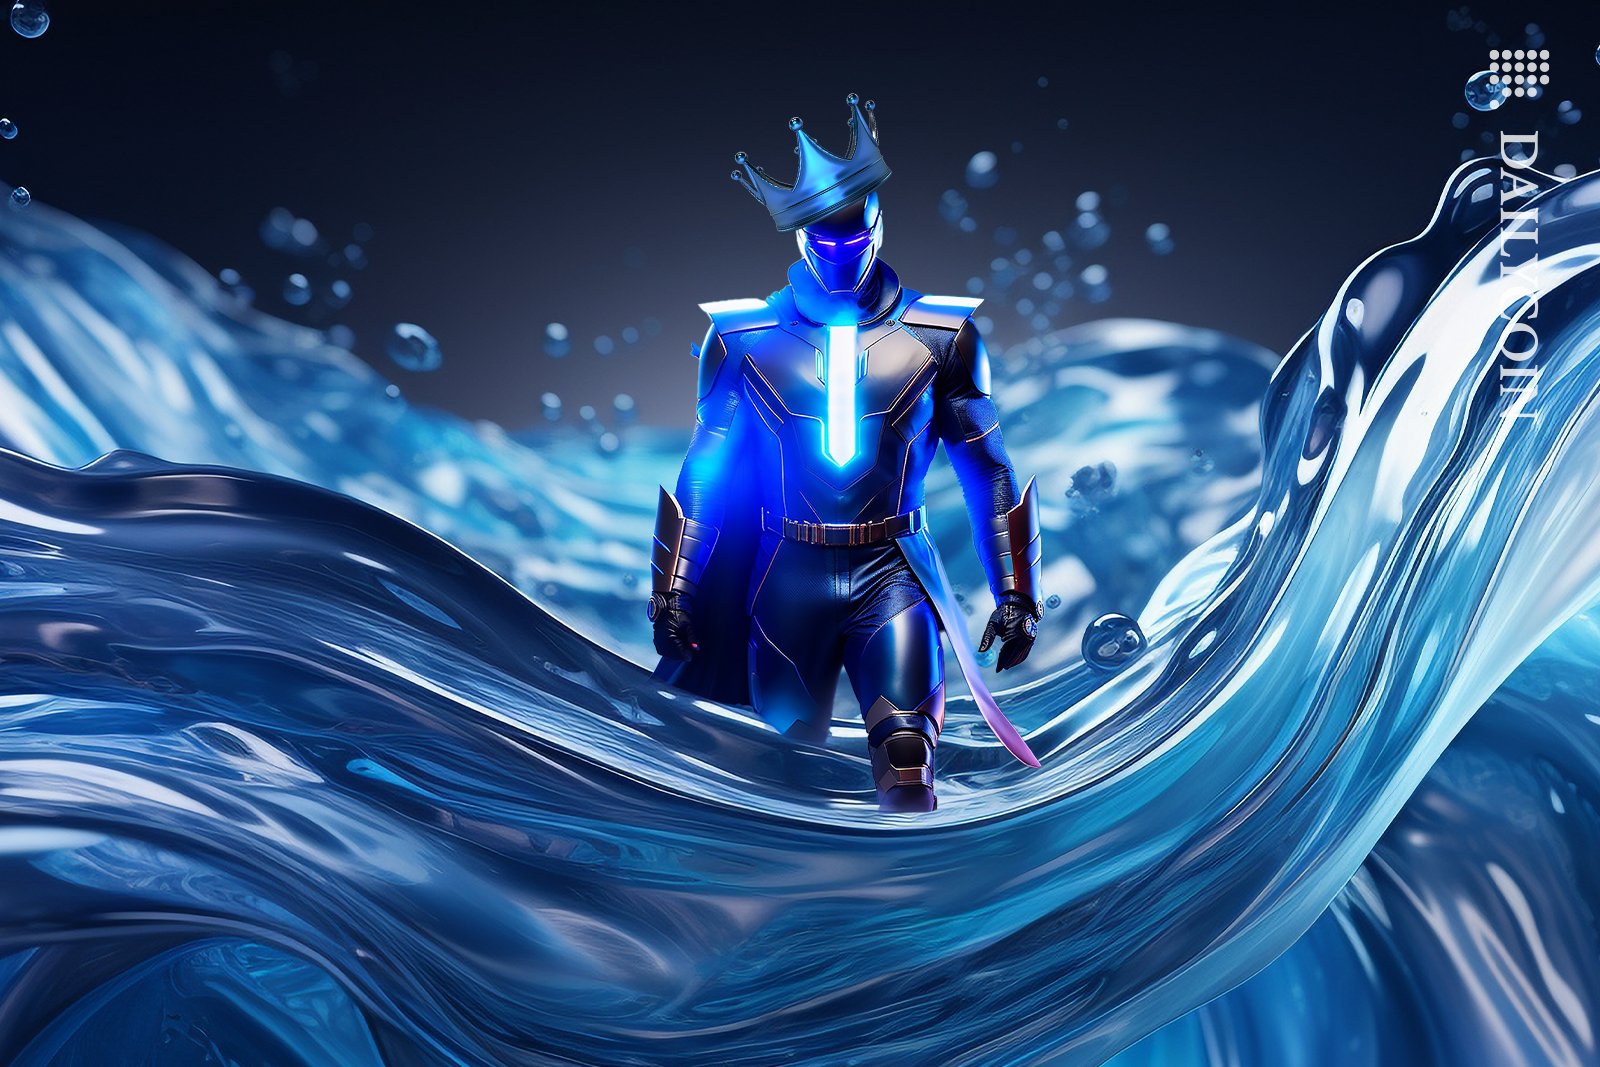 A digital king looking like a superhero stepping out the blue water.